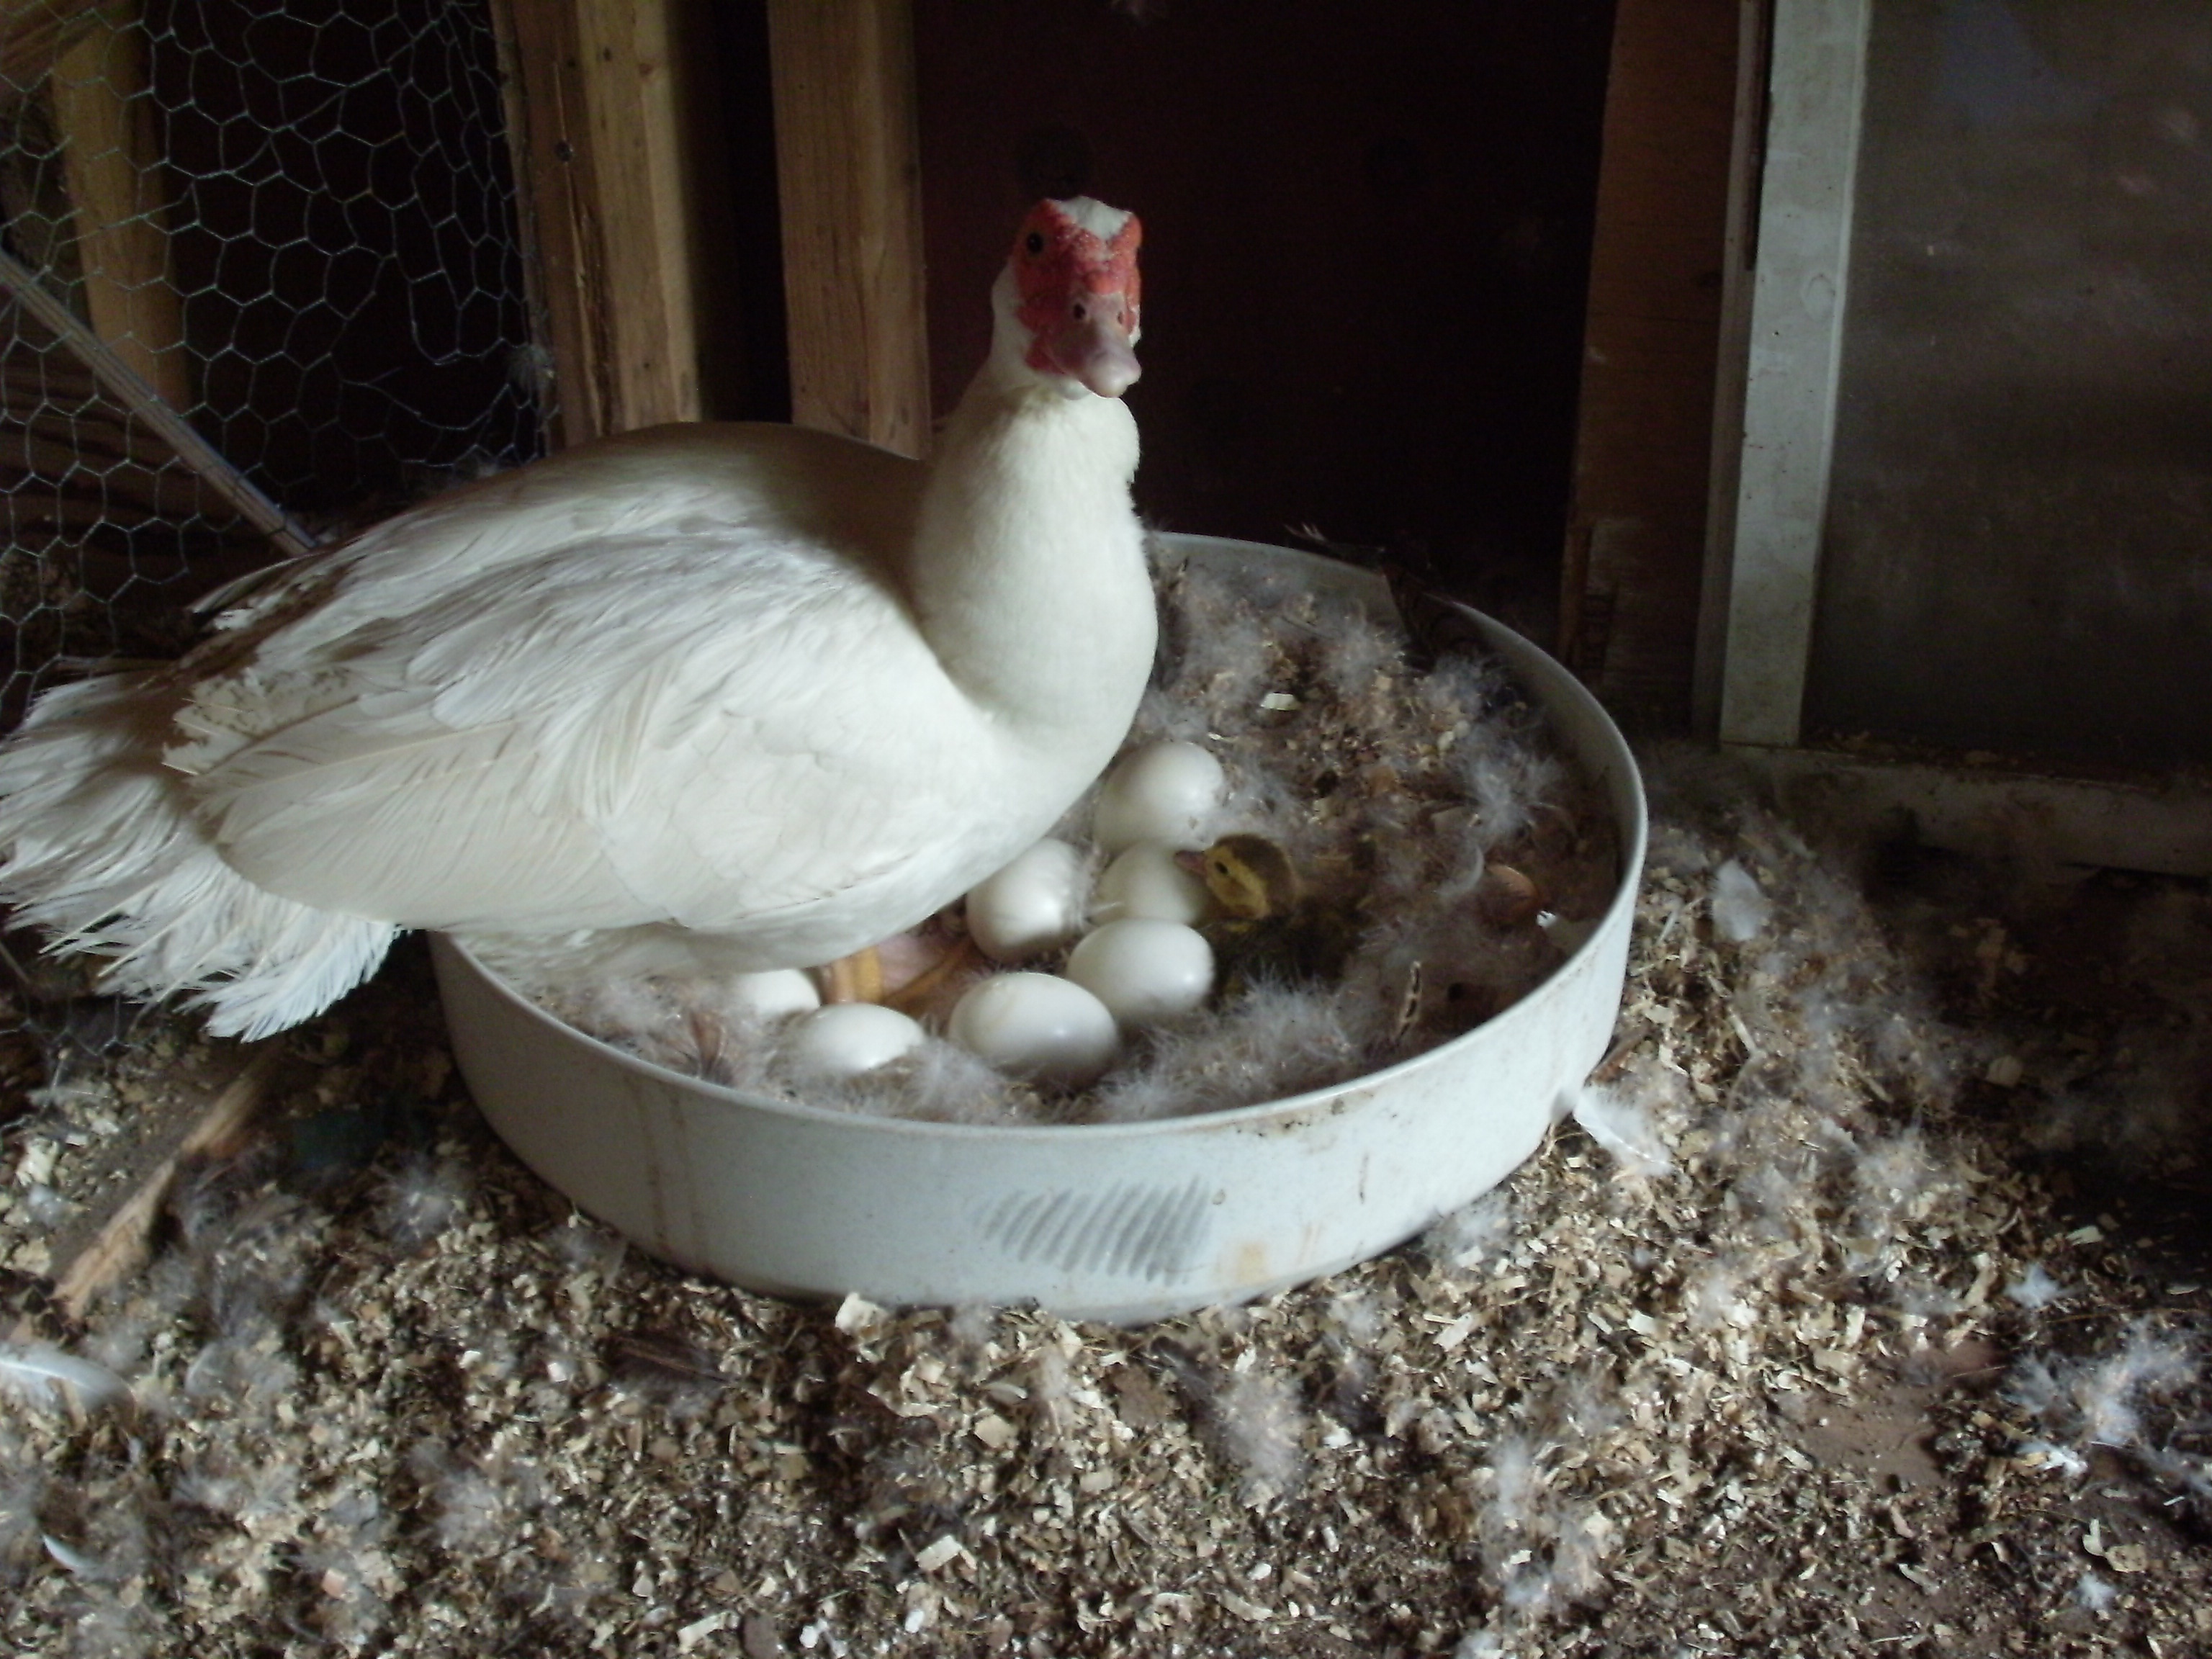 Female Muscovy duck raised 11 babies this summer. Unfortunately she was killed by a raccoon before noon one morning.